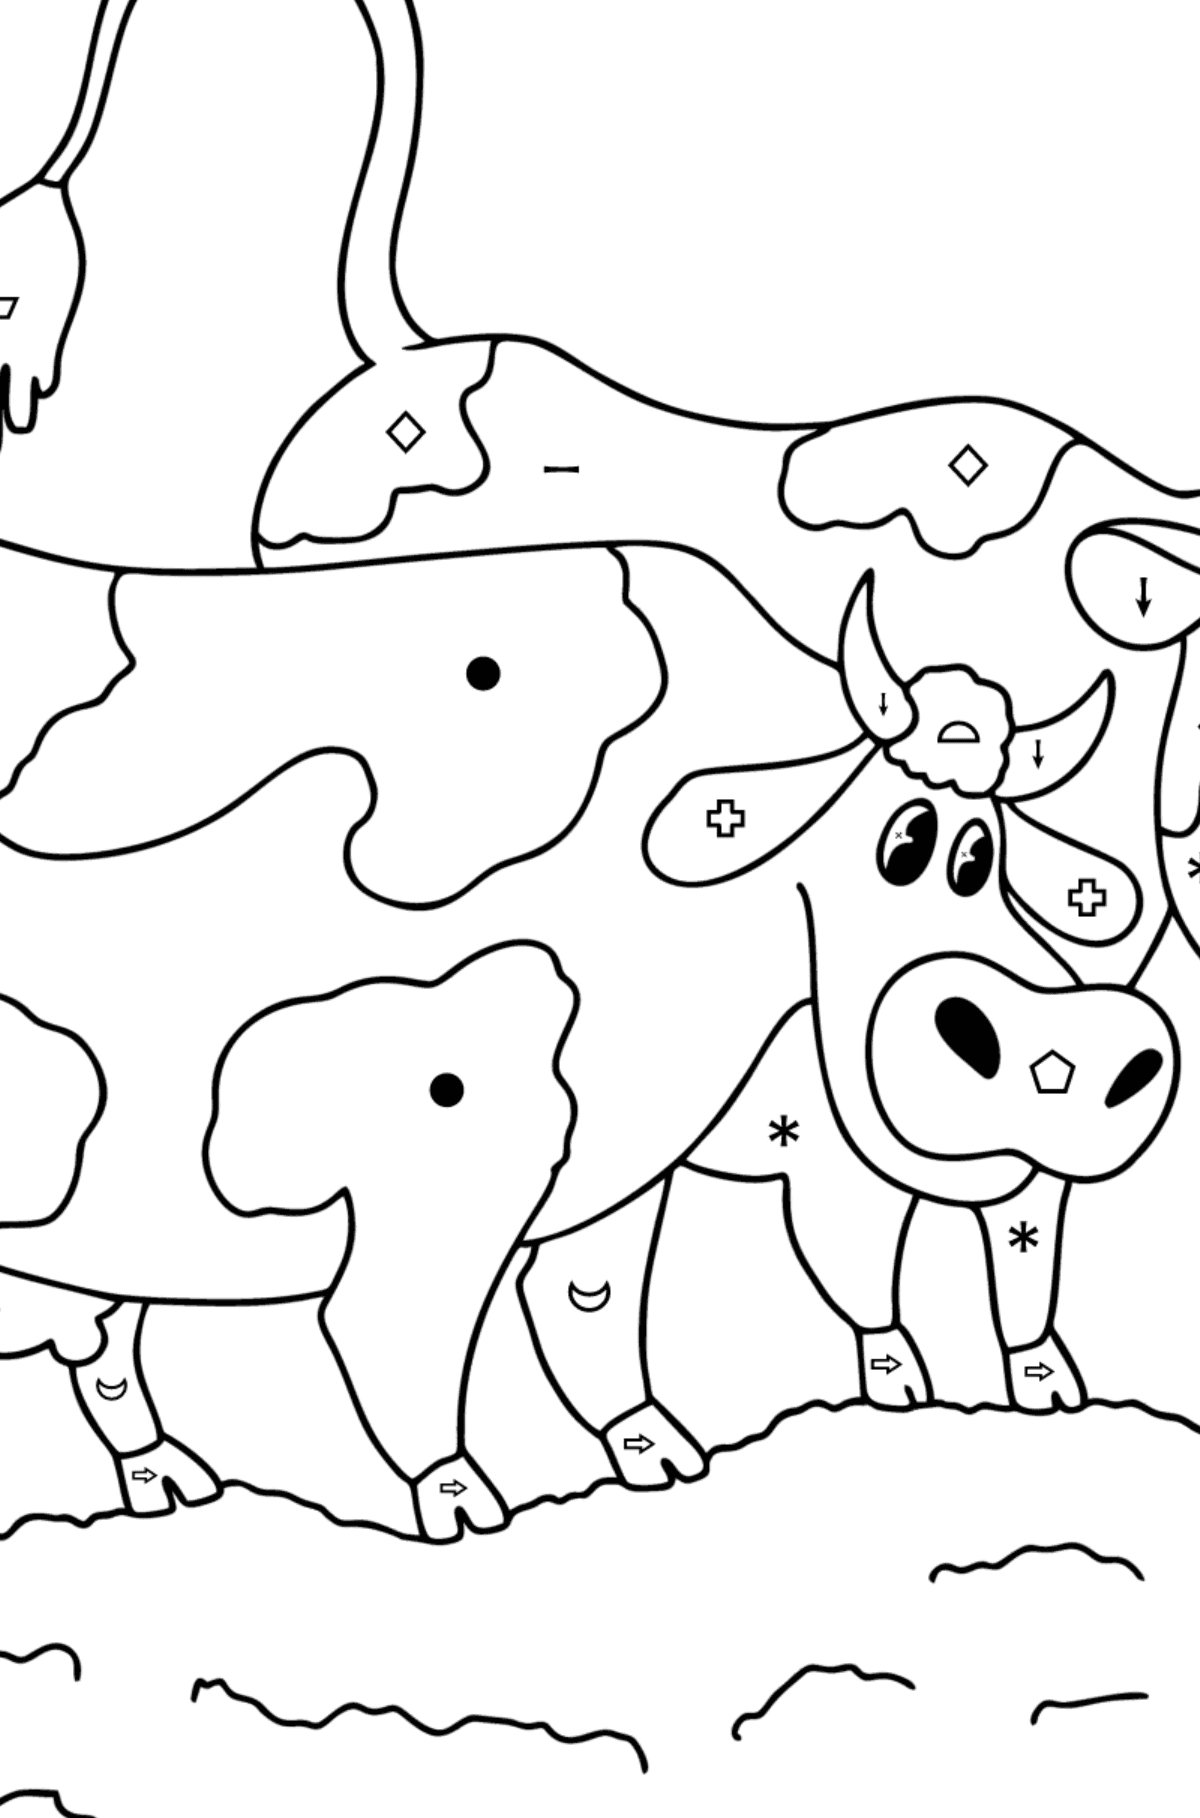 Two cows in the meadow Coloring page - Coloring by Symbols and Geometric Shapes for Kids